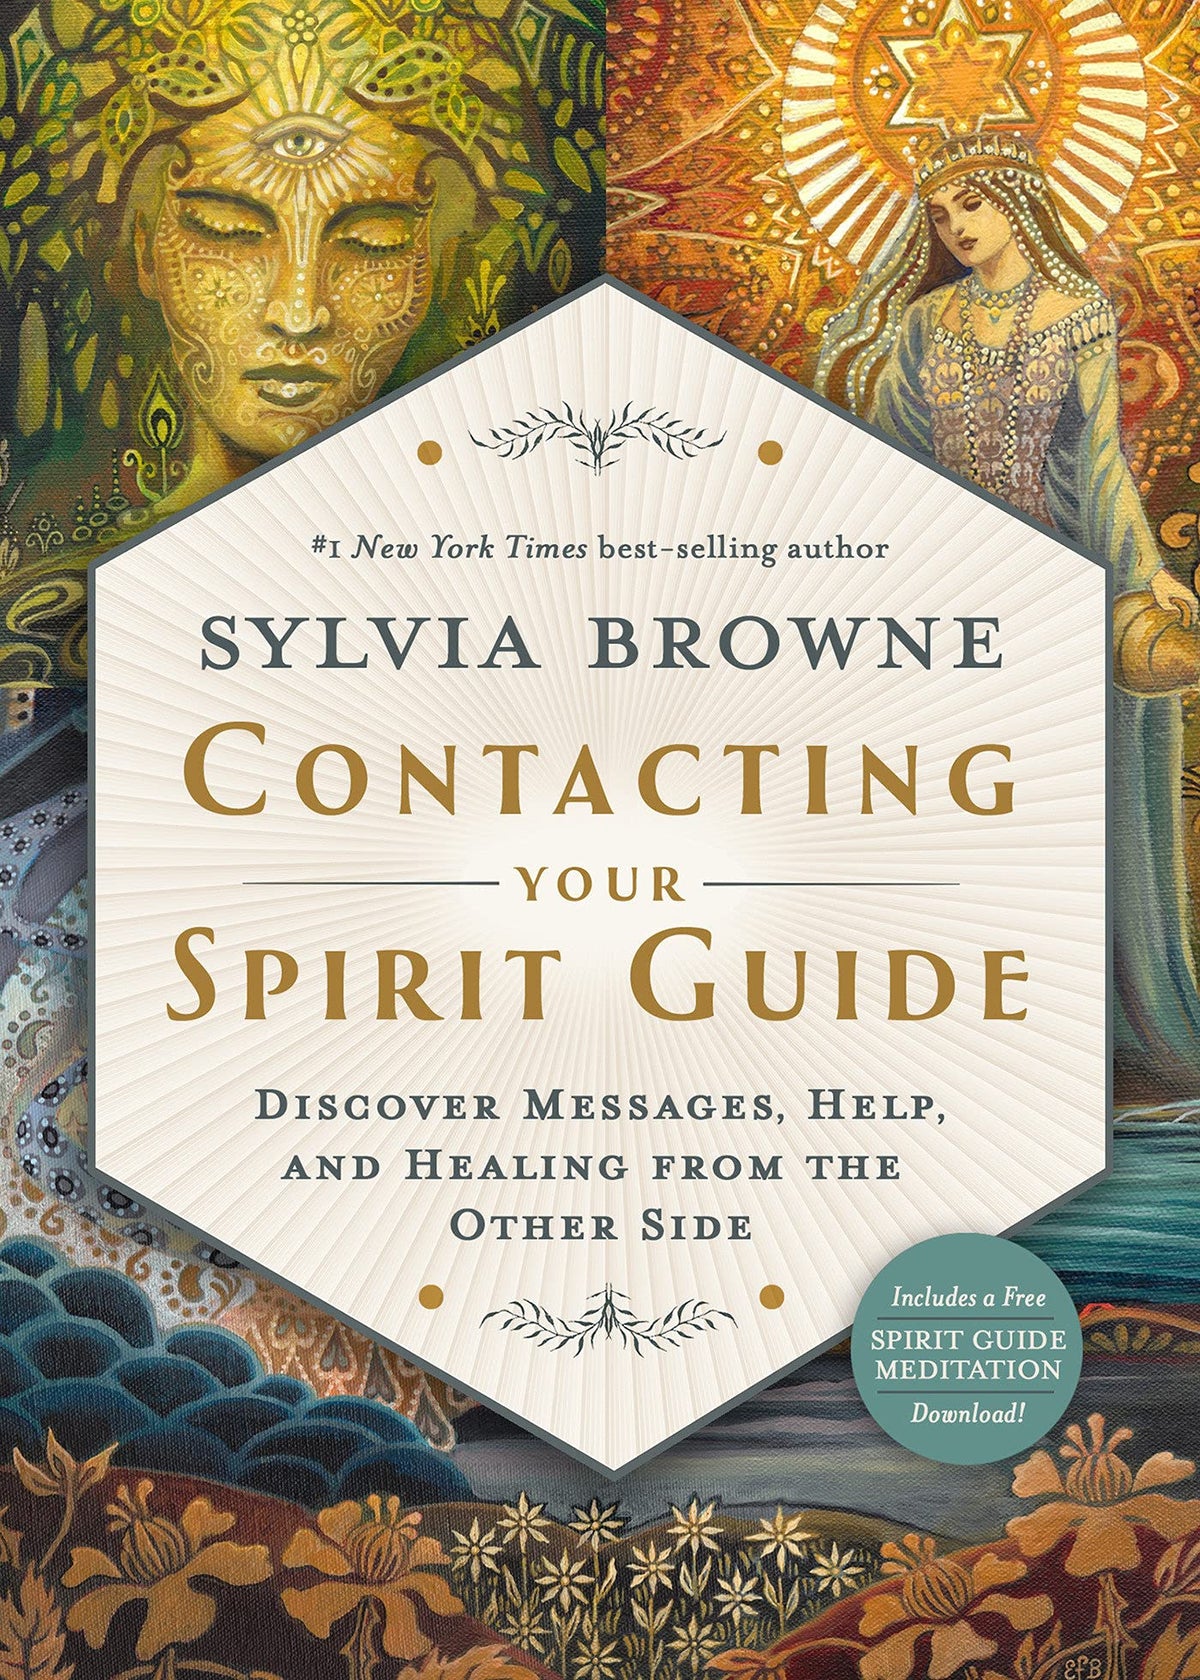 Contacting Your Spirit Guide: Discover Messages, Help, and Healing from the Other Side